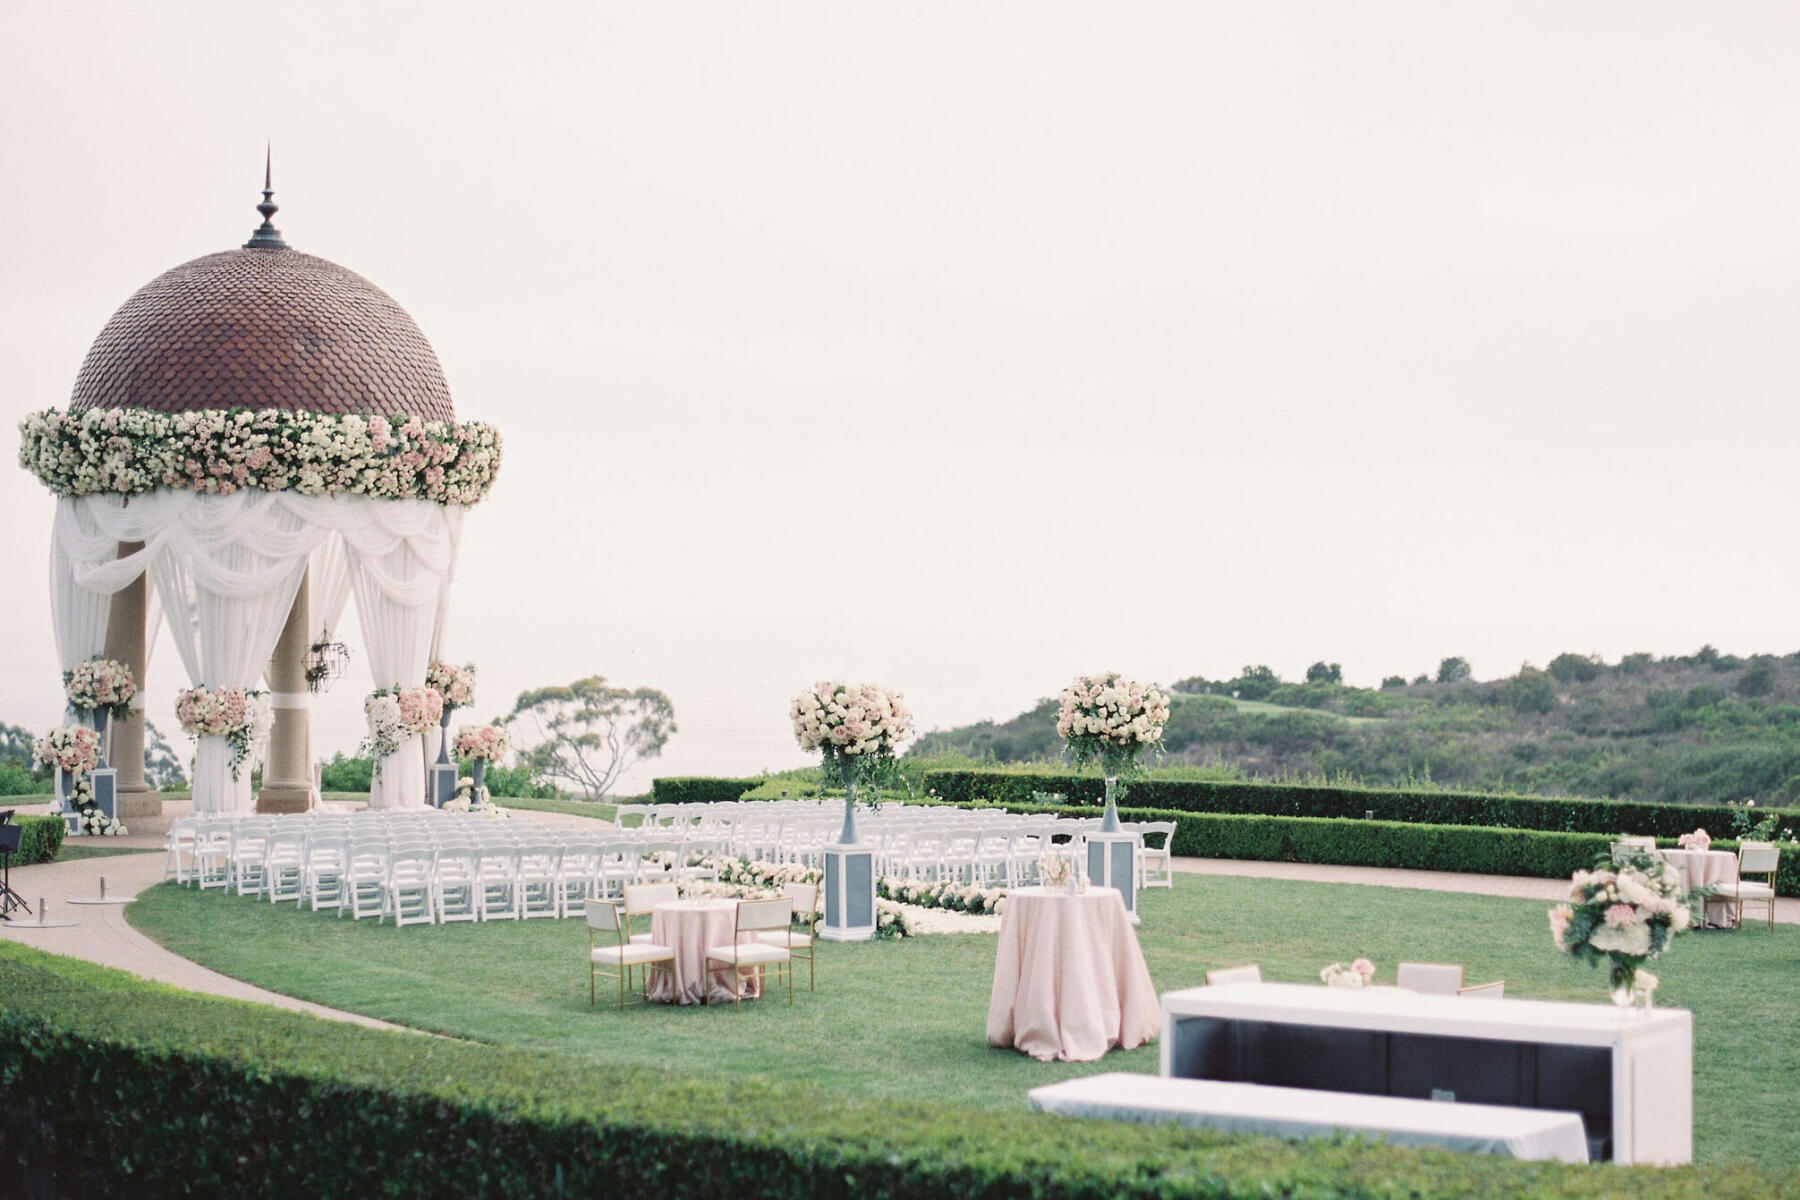 Celebrity Wedding: An outdoor ceremony with a tiled gazebo and golf course in the background in Newport Beach.